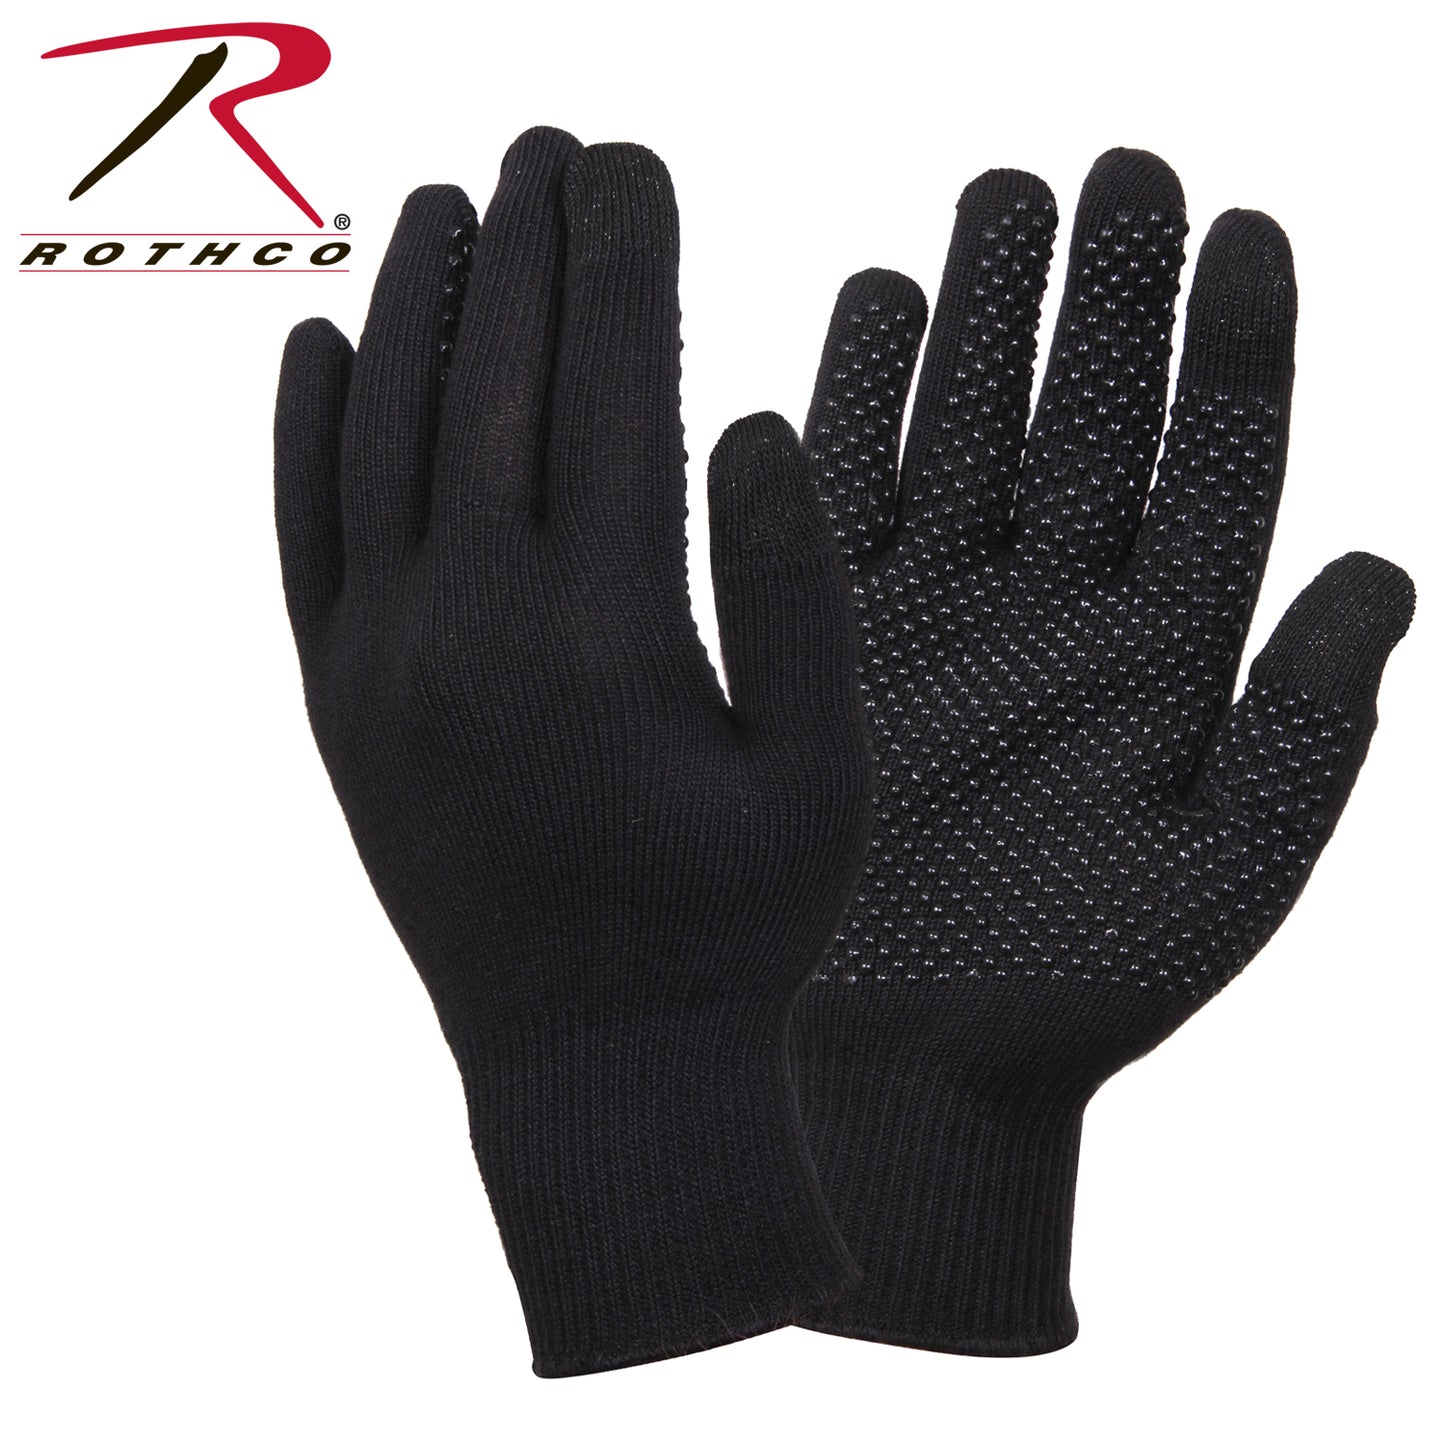 Rothco Black Cell Phone Touch Screen Formfitting Winter Gloves w/ Gripper Dots